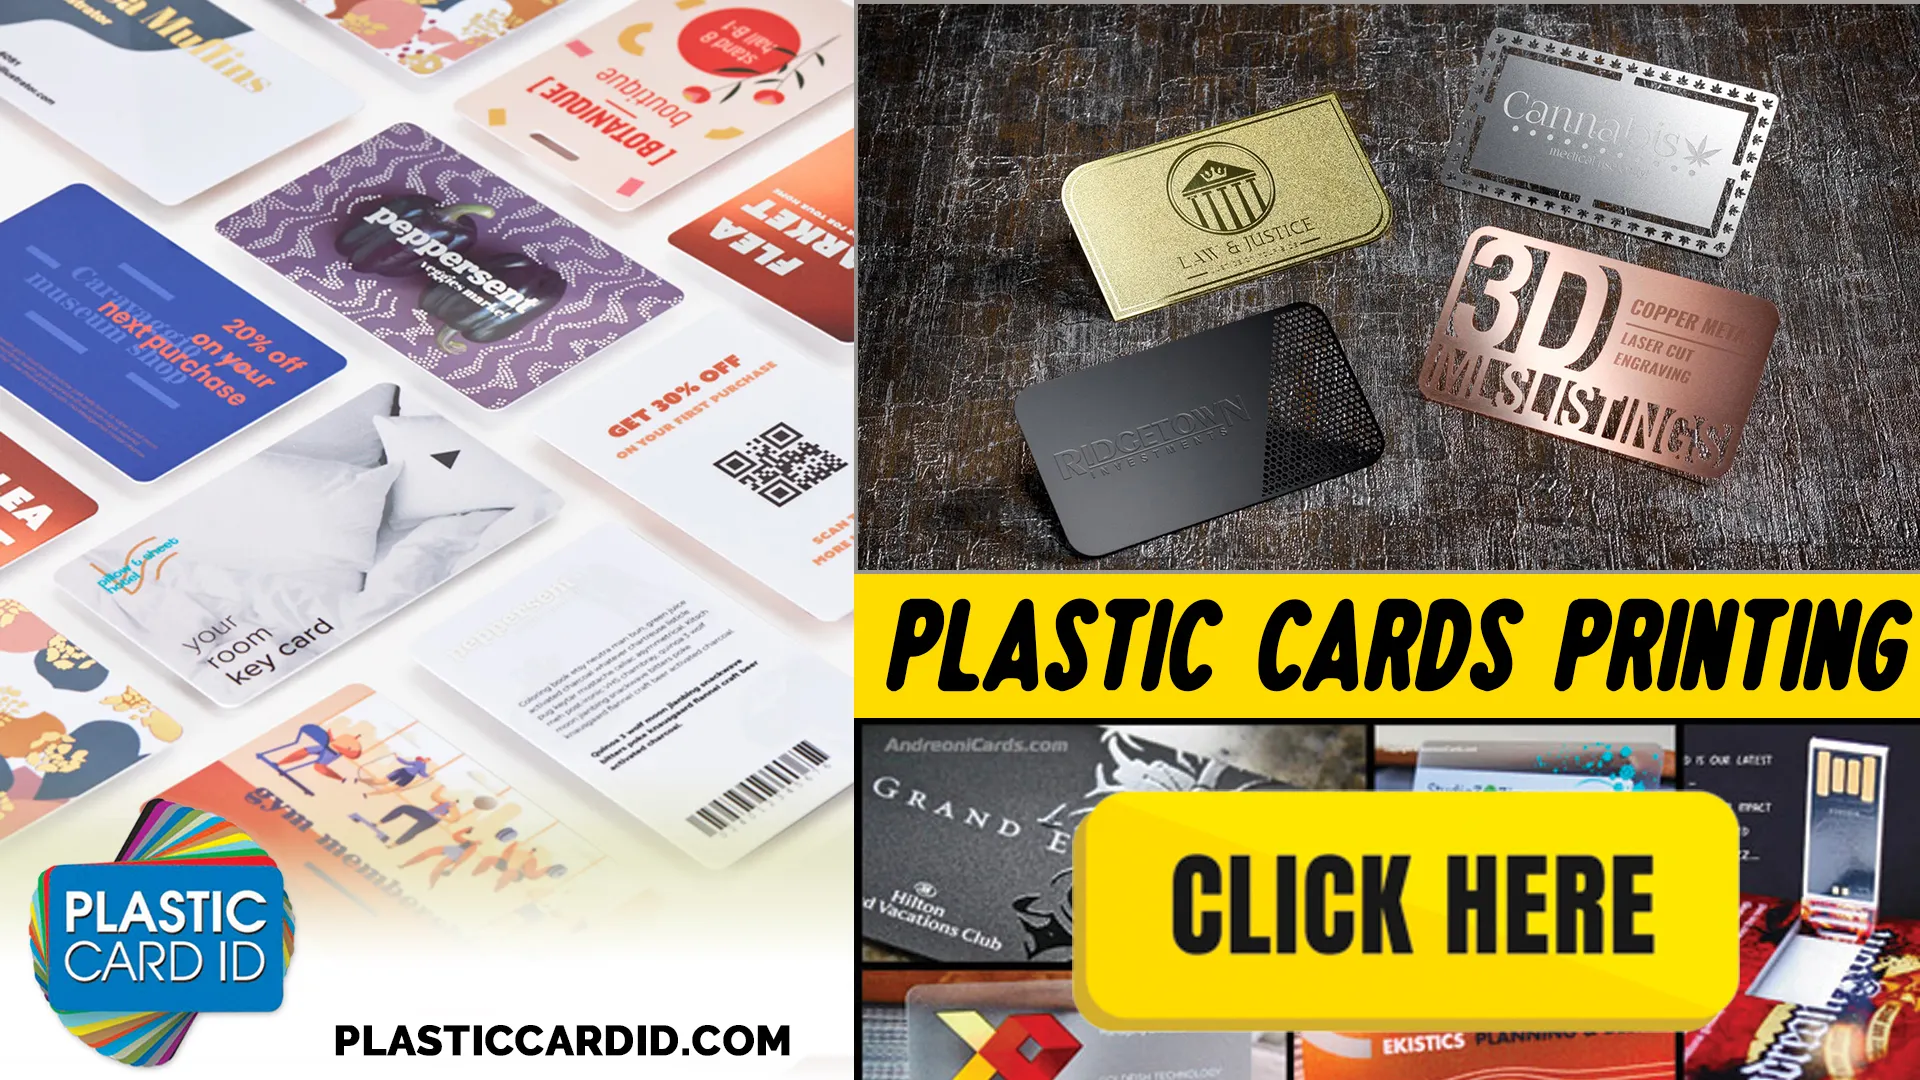 Integrating Care into Routine for Plastic Cards